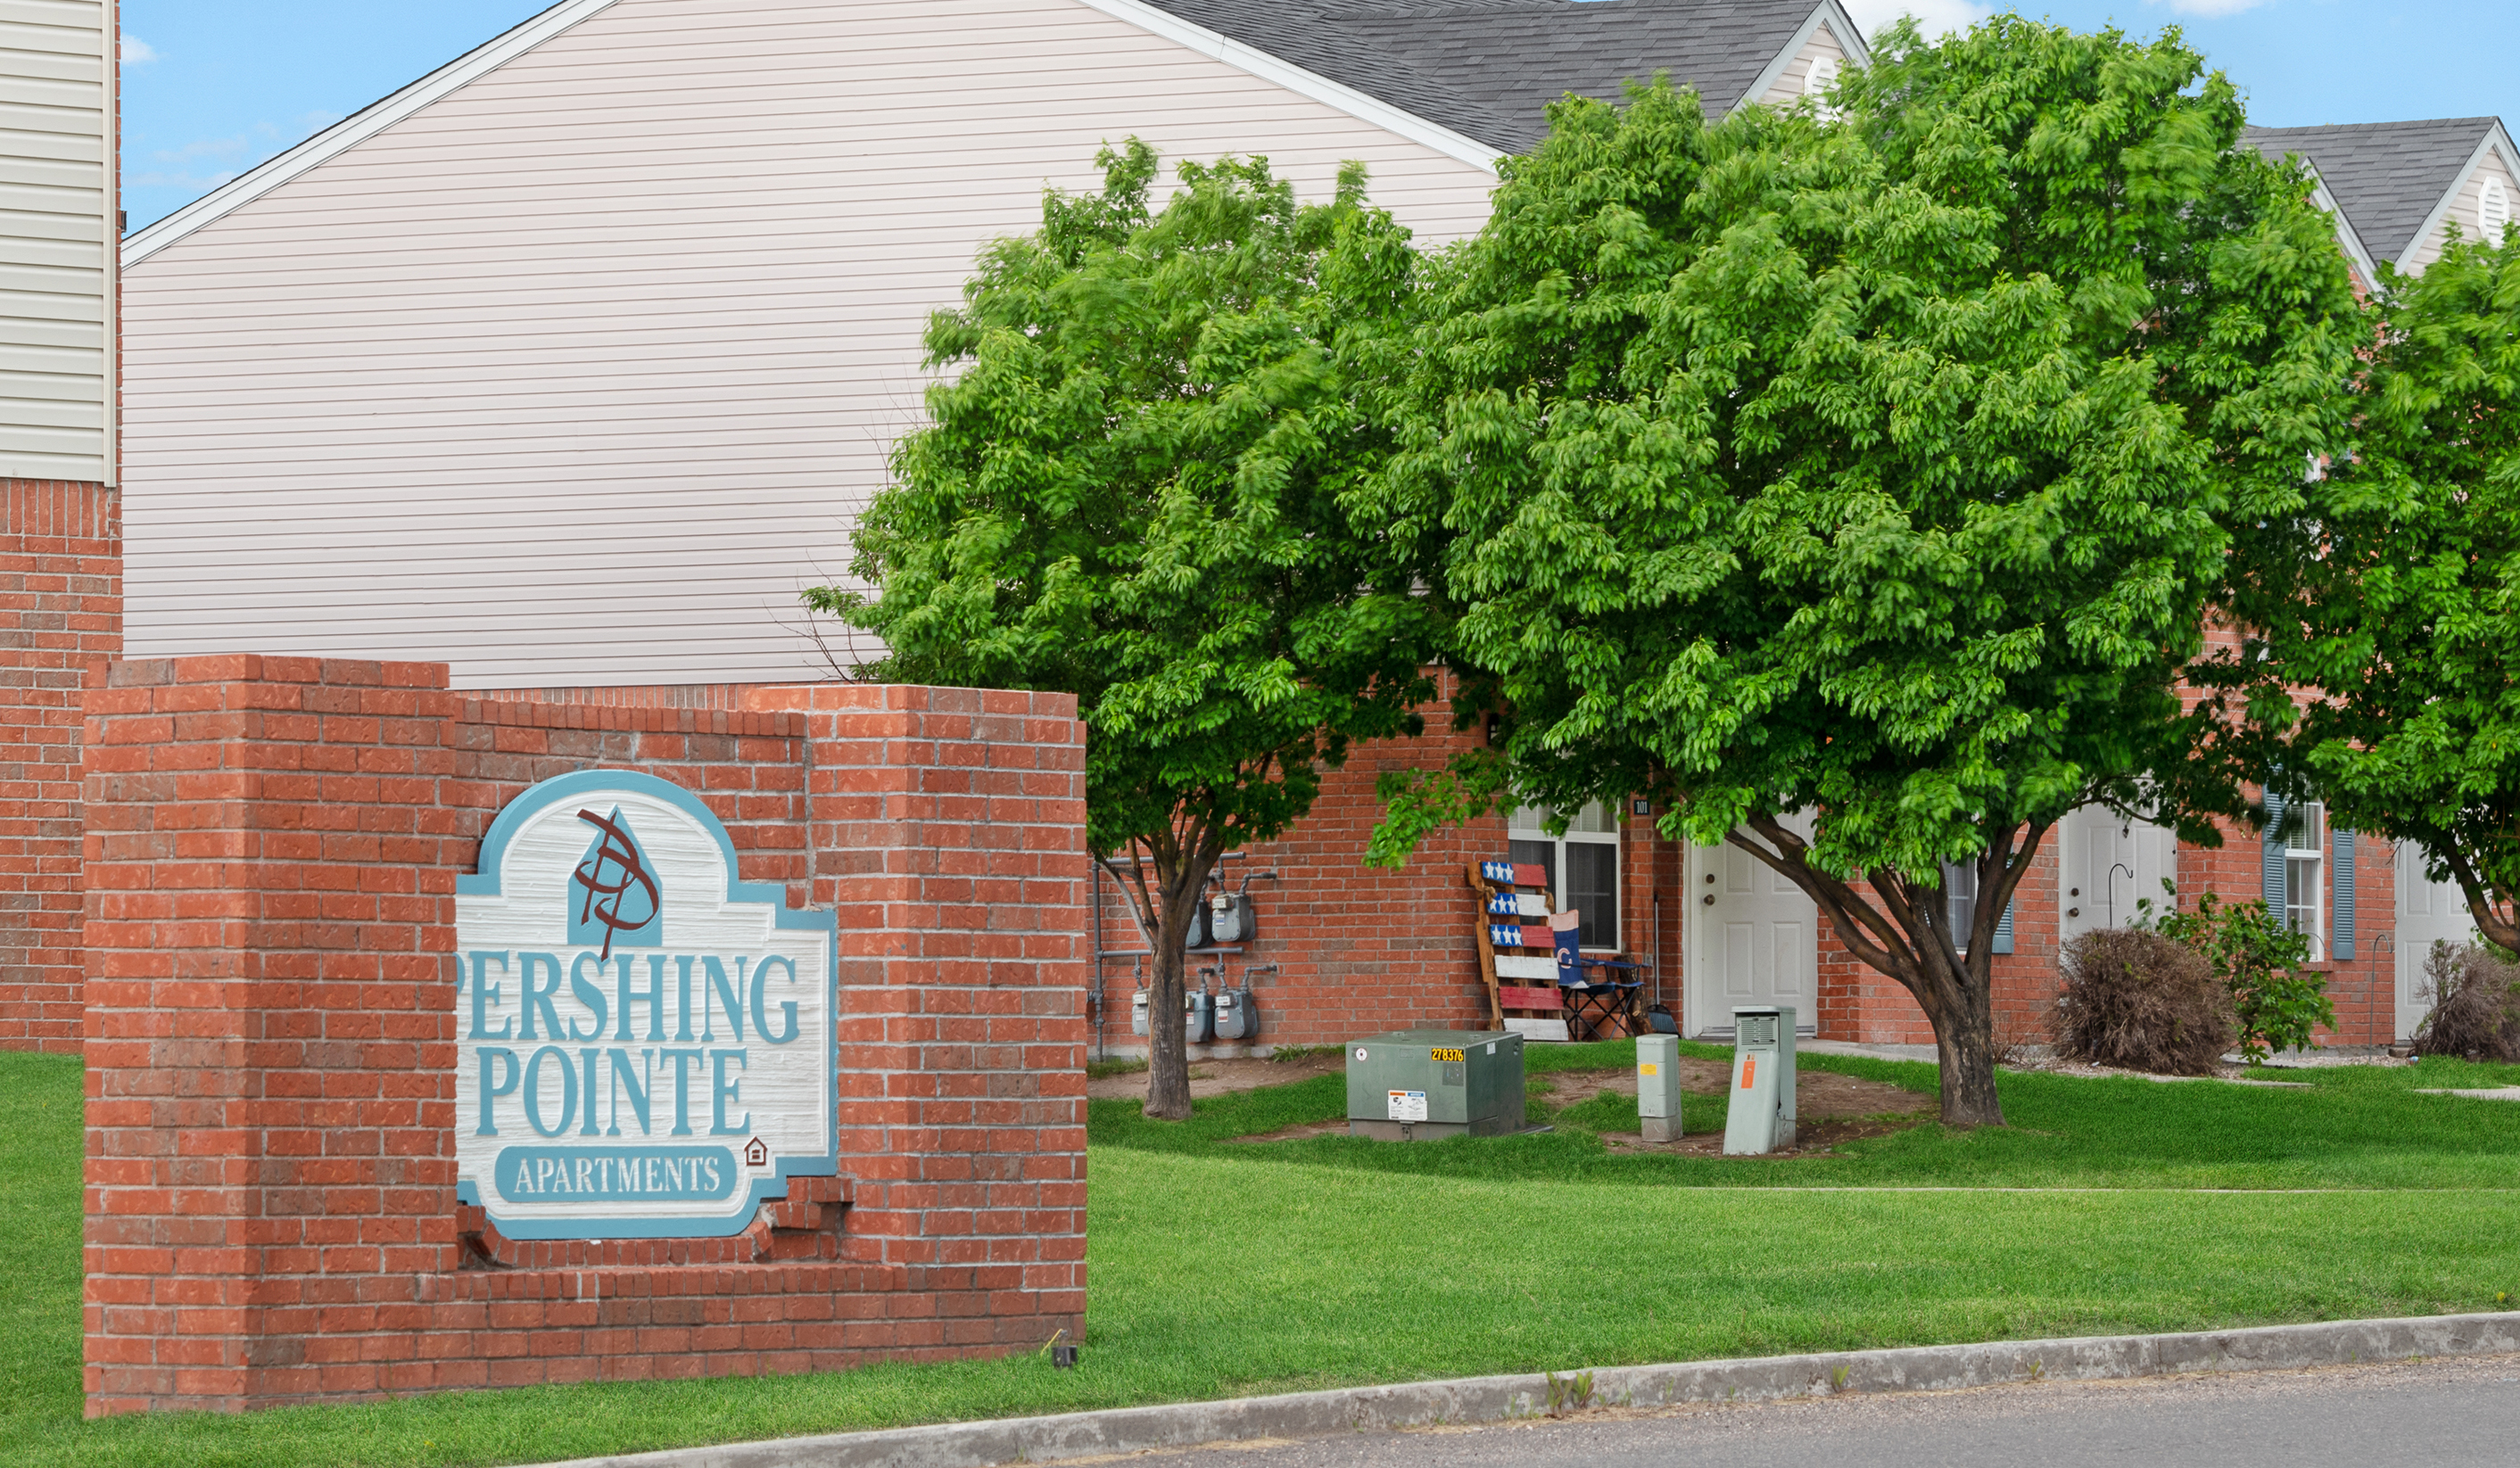 Pershing Pointe Townhomes Property Signage